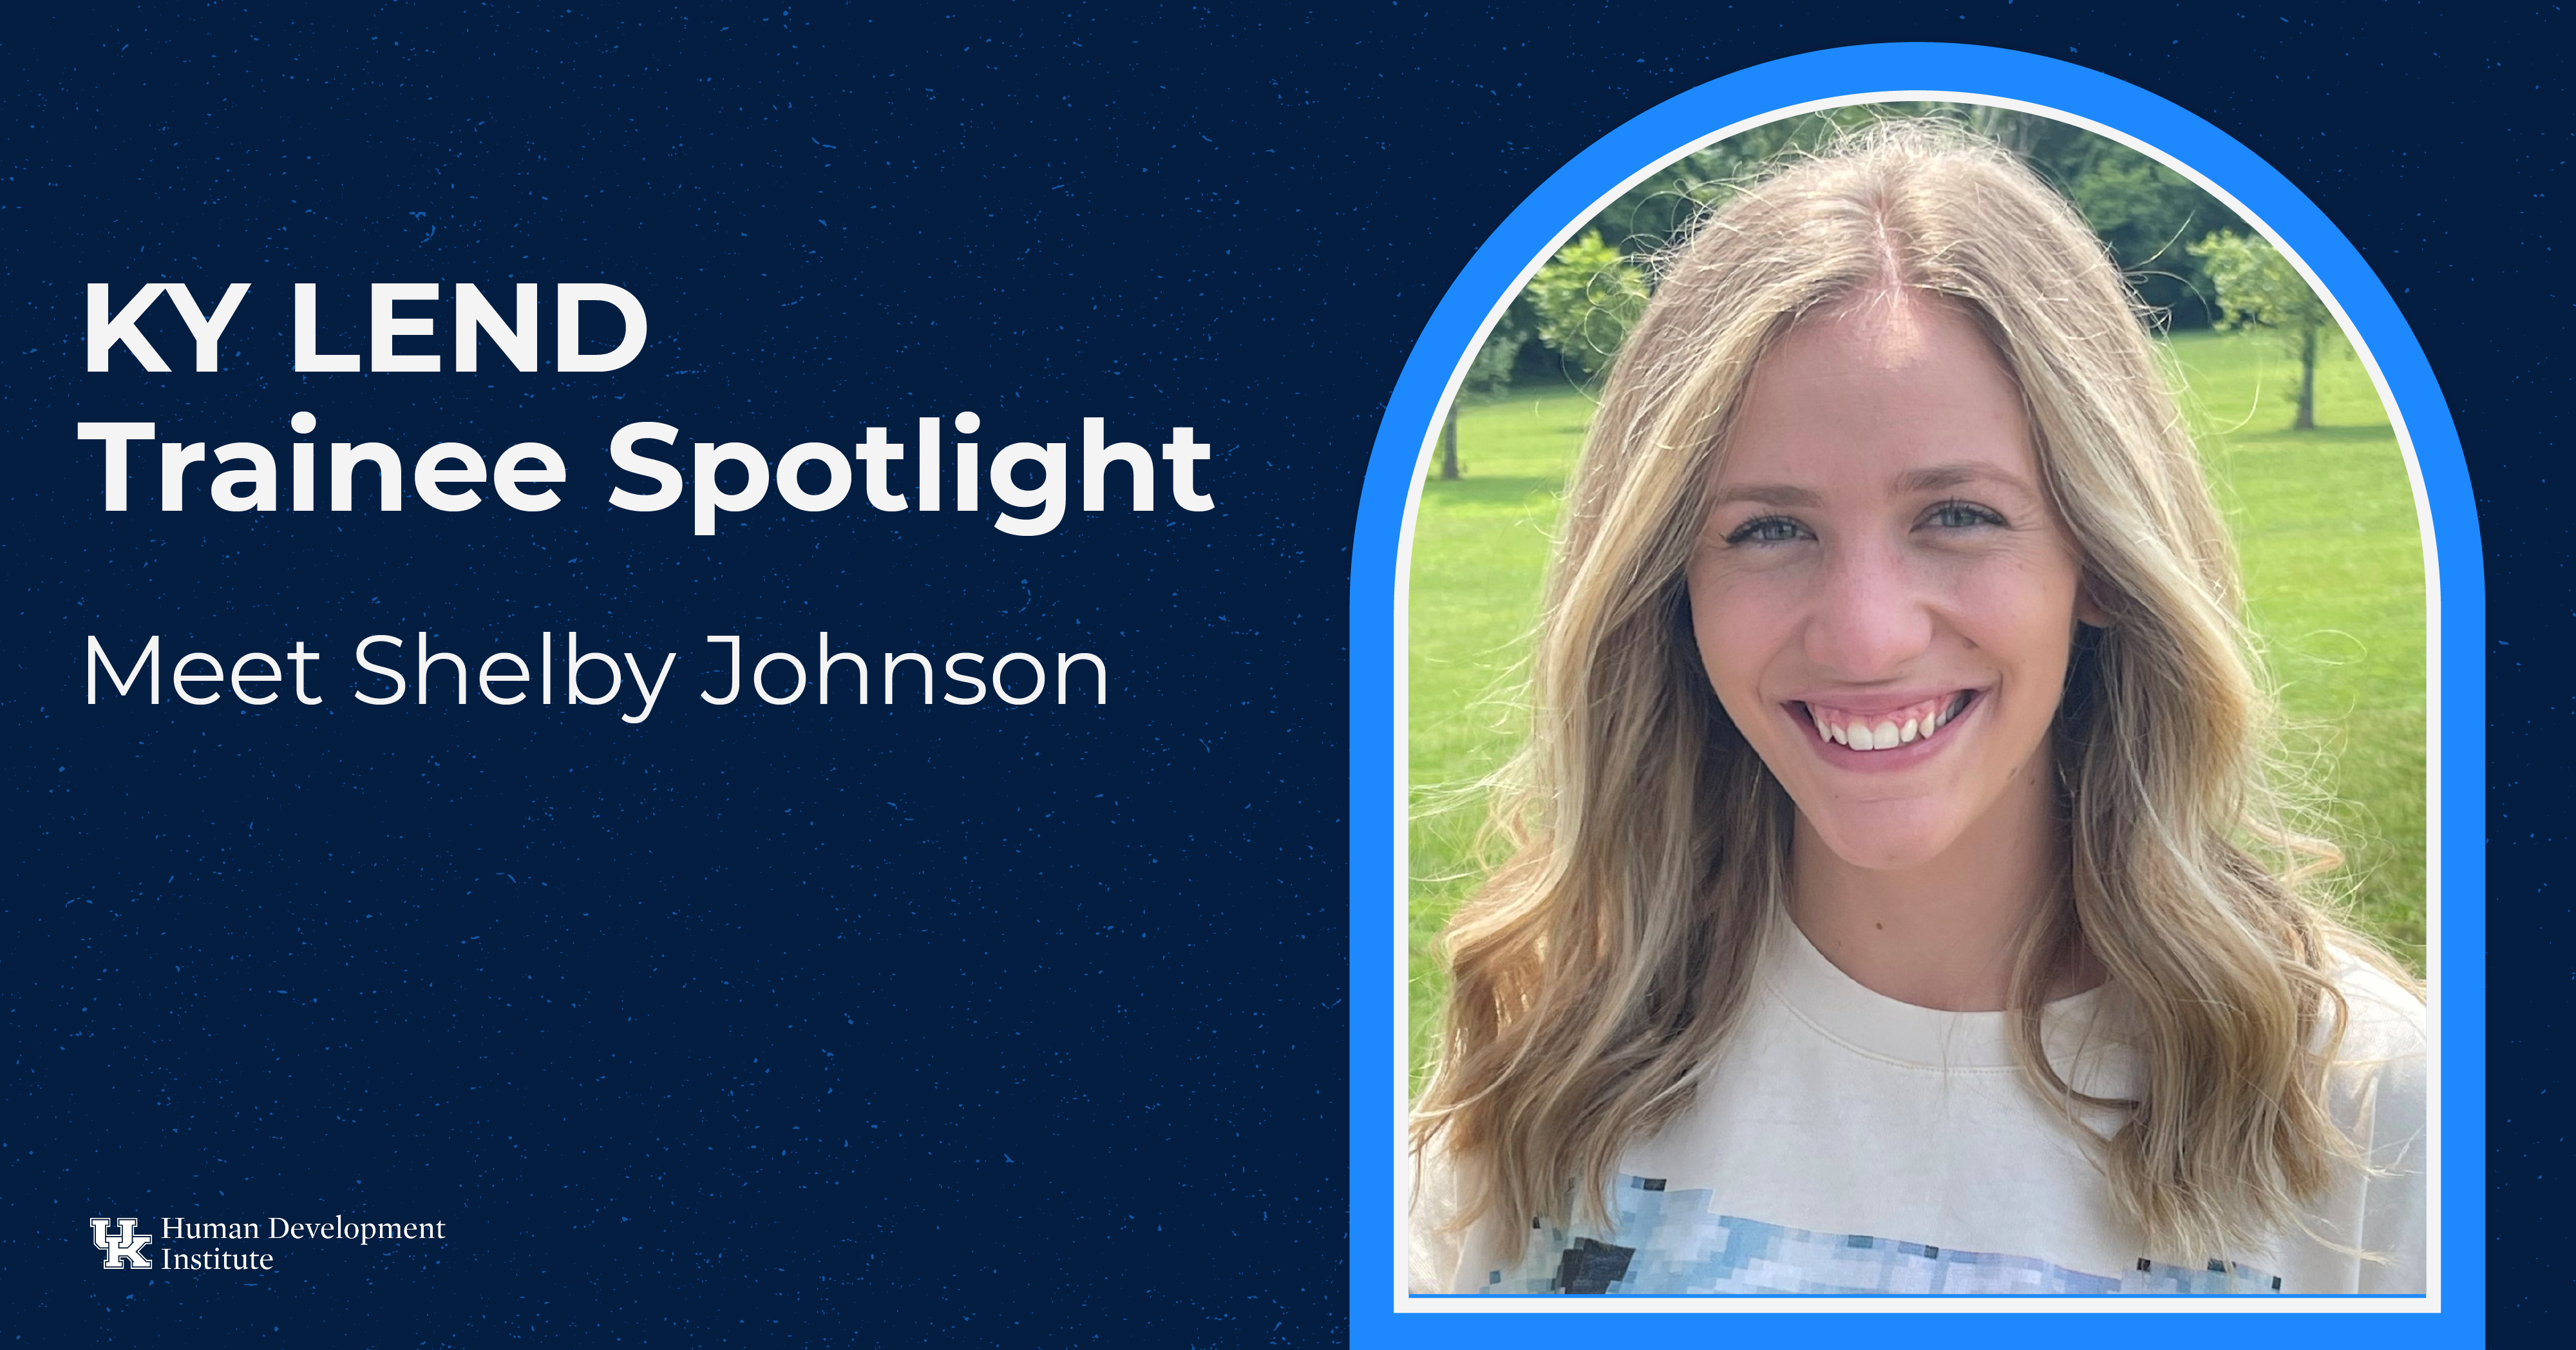 KYLEND Trainee Spotlight: Shelby Johnson. She has long blonde hair and a white t-shirt